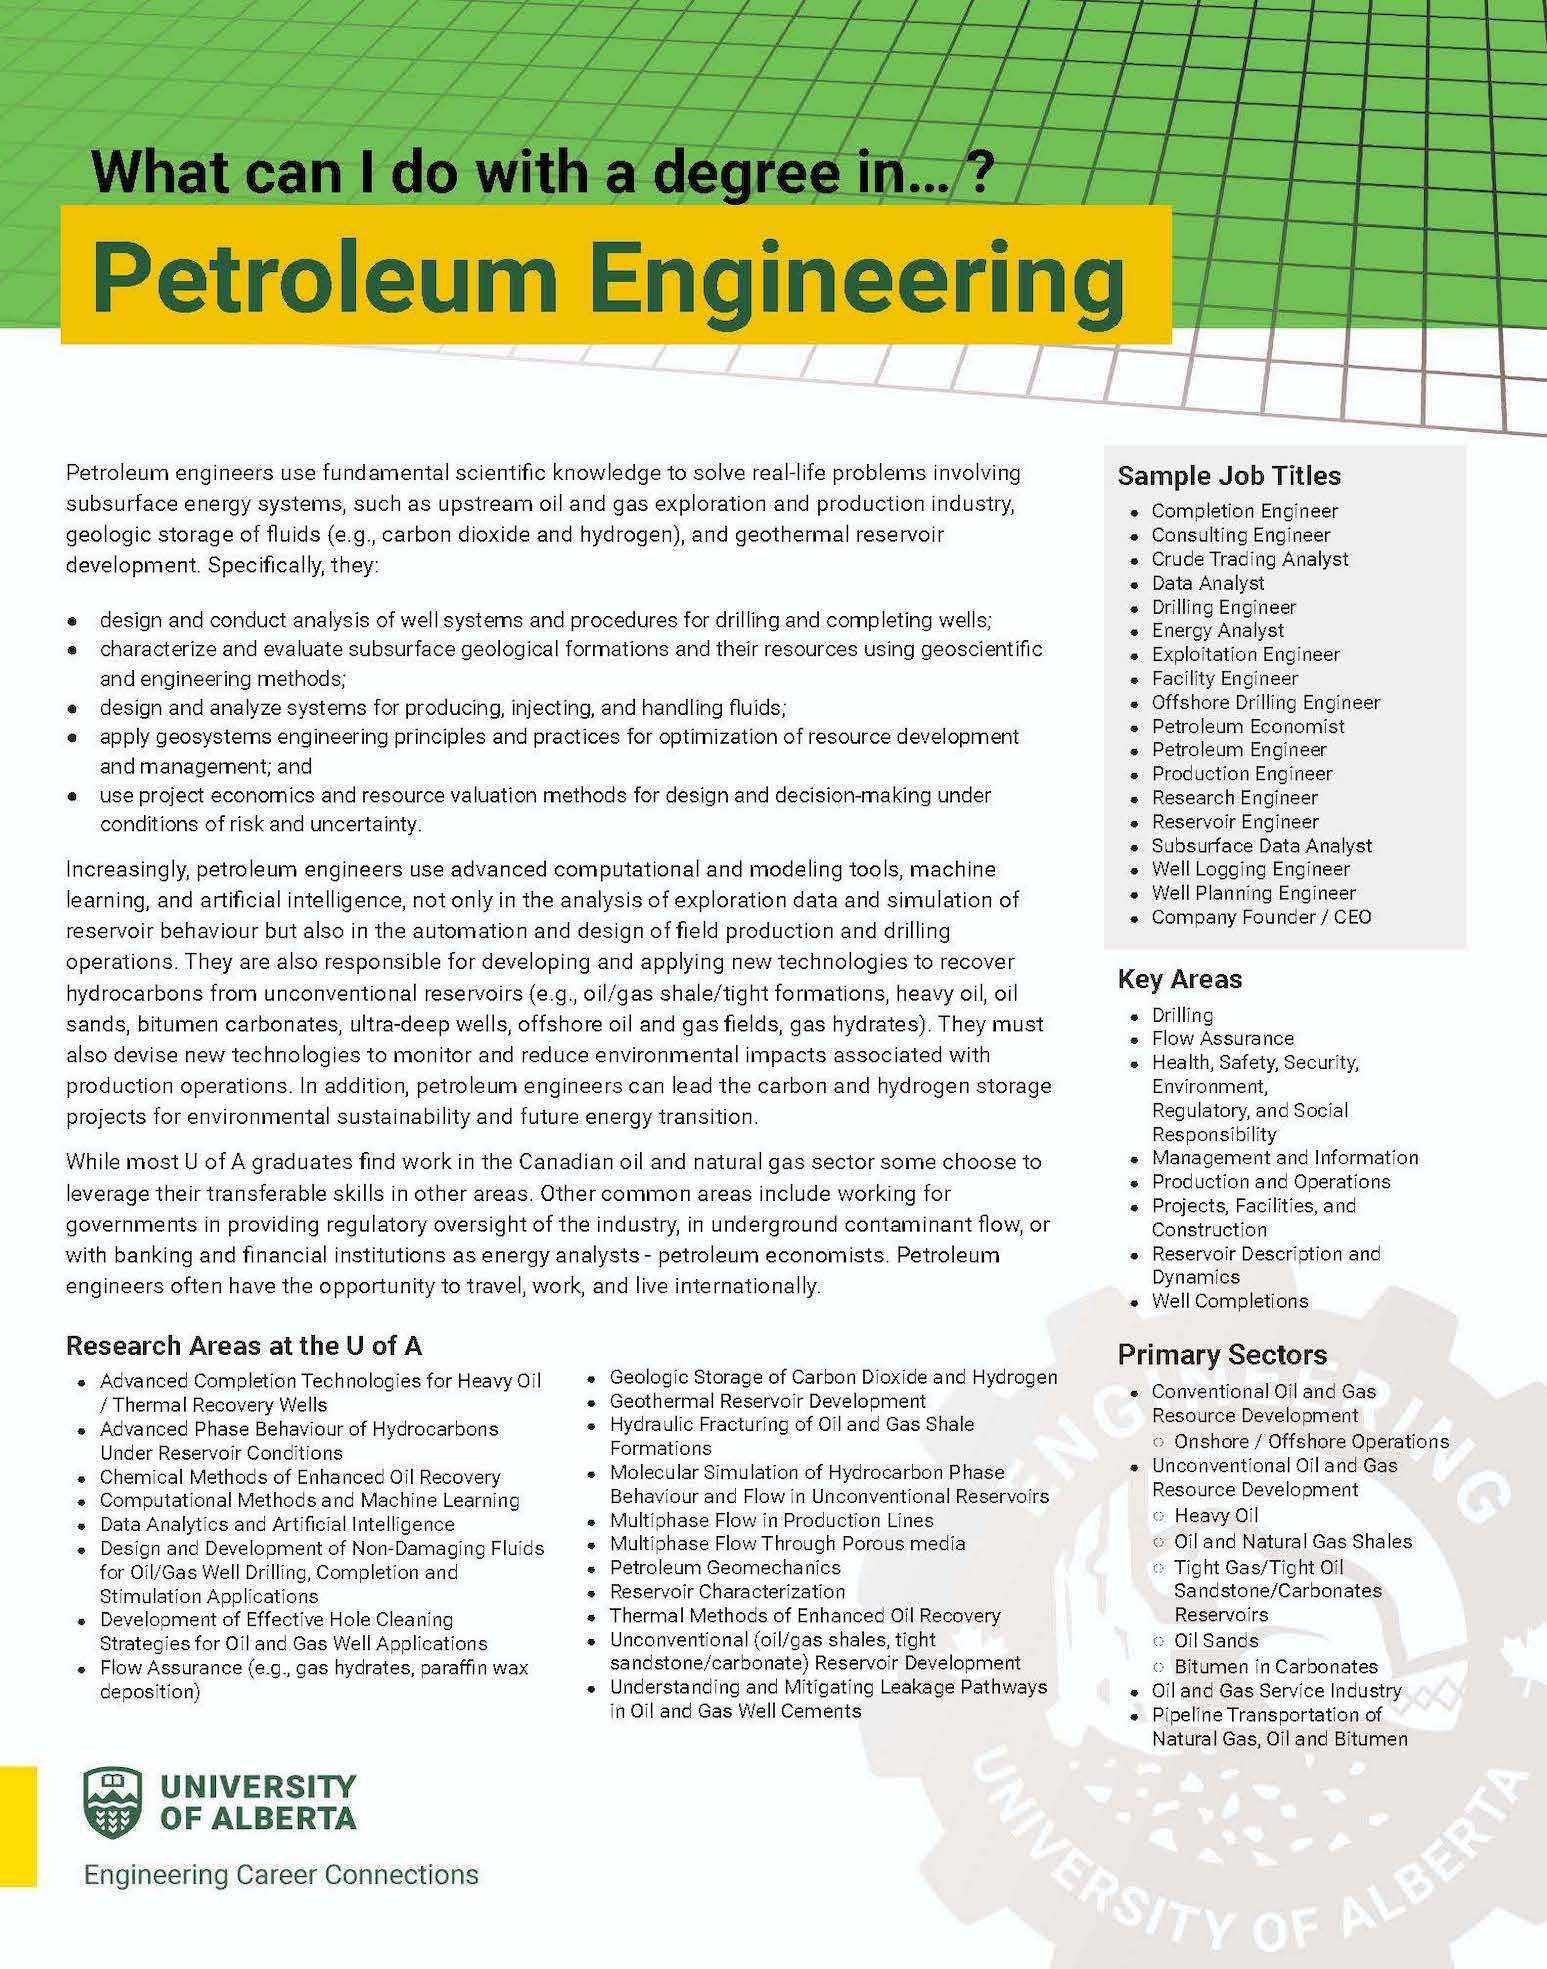 Screenshot of the "What Can I Do With A Degree in Petroleum Engineering?” Handout. The image links to the handout.